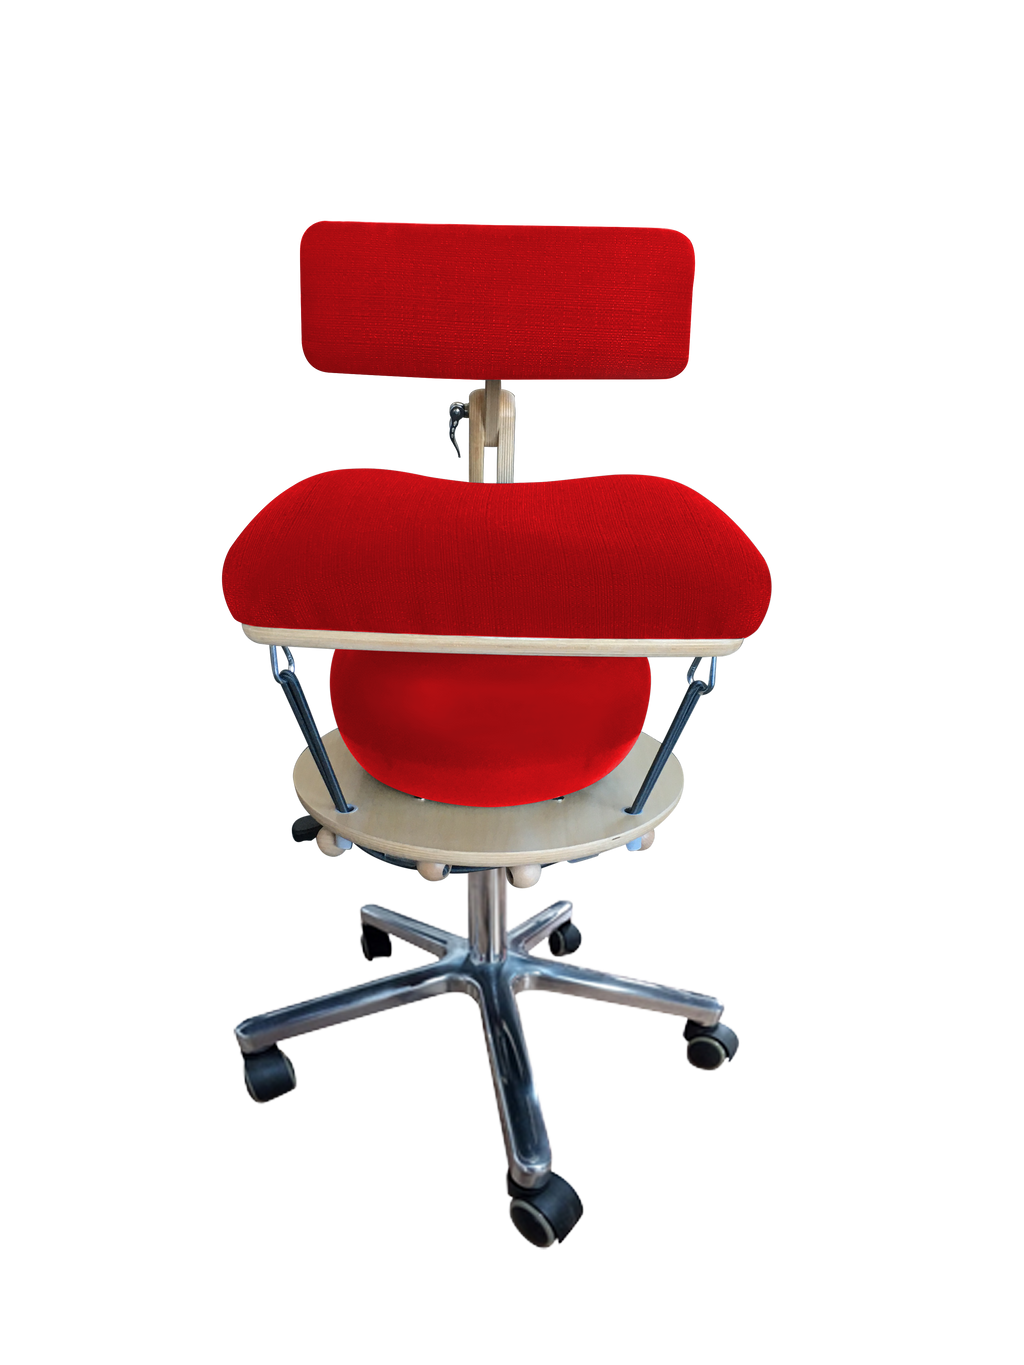 Språng Chair 2.0 - Deluxe Edition | Rosso Corsa Red Yoga Stretch